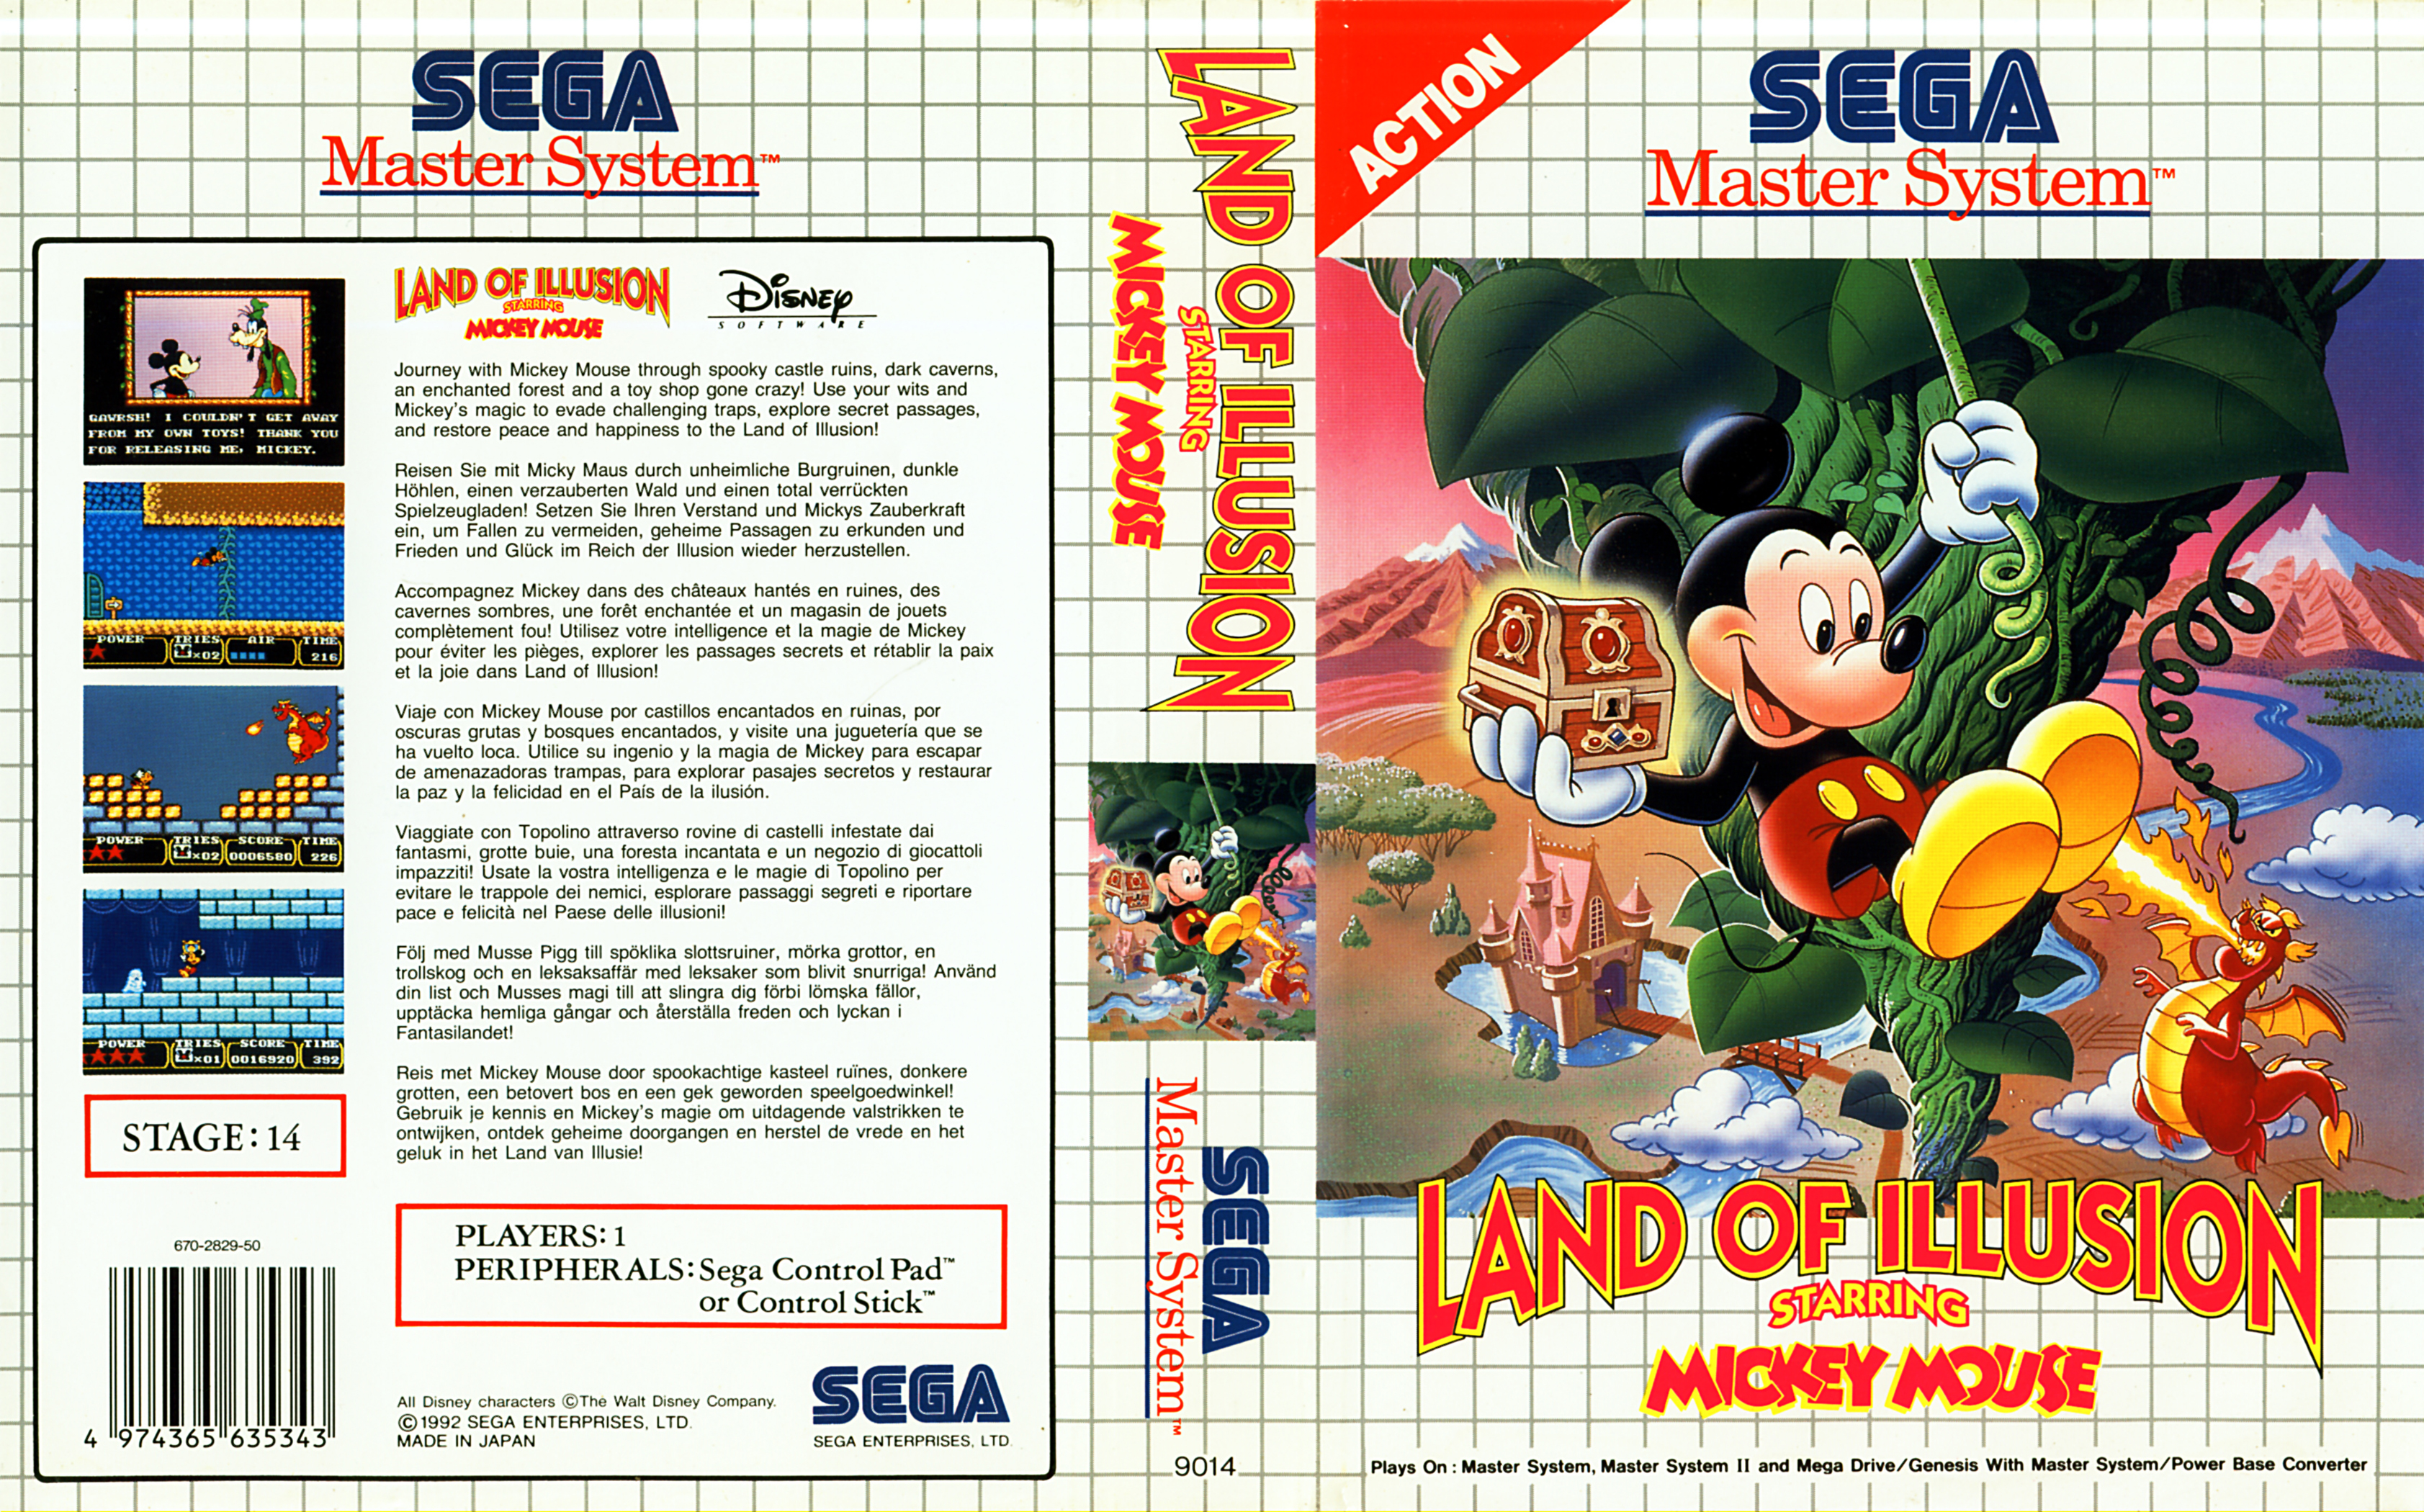 land-of-illusion-starring-mickey-mouse.jpg